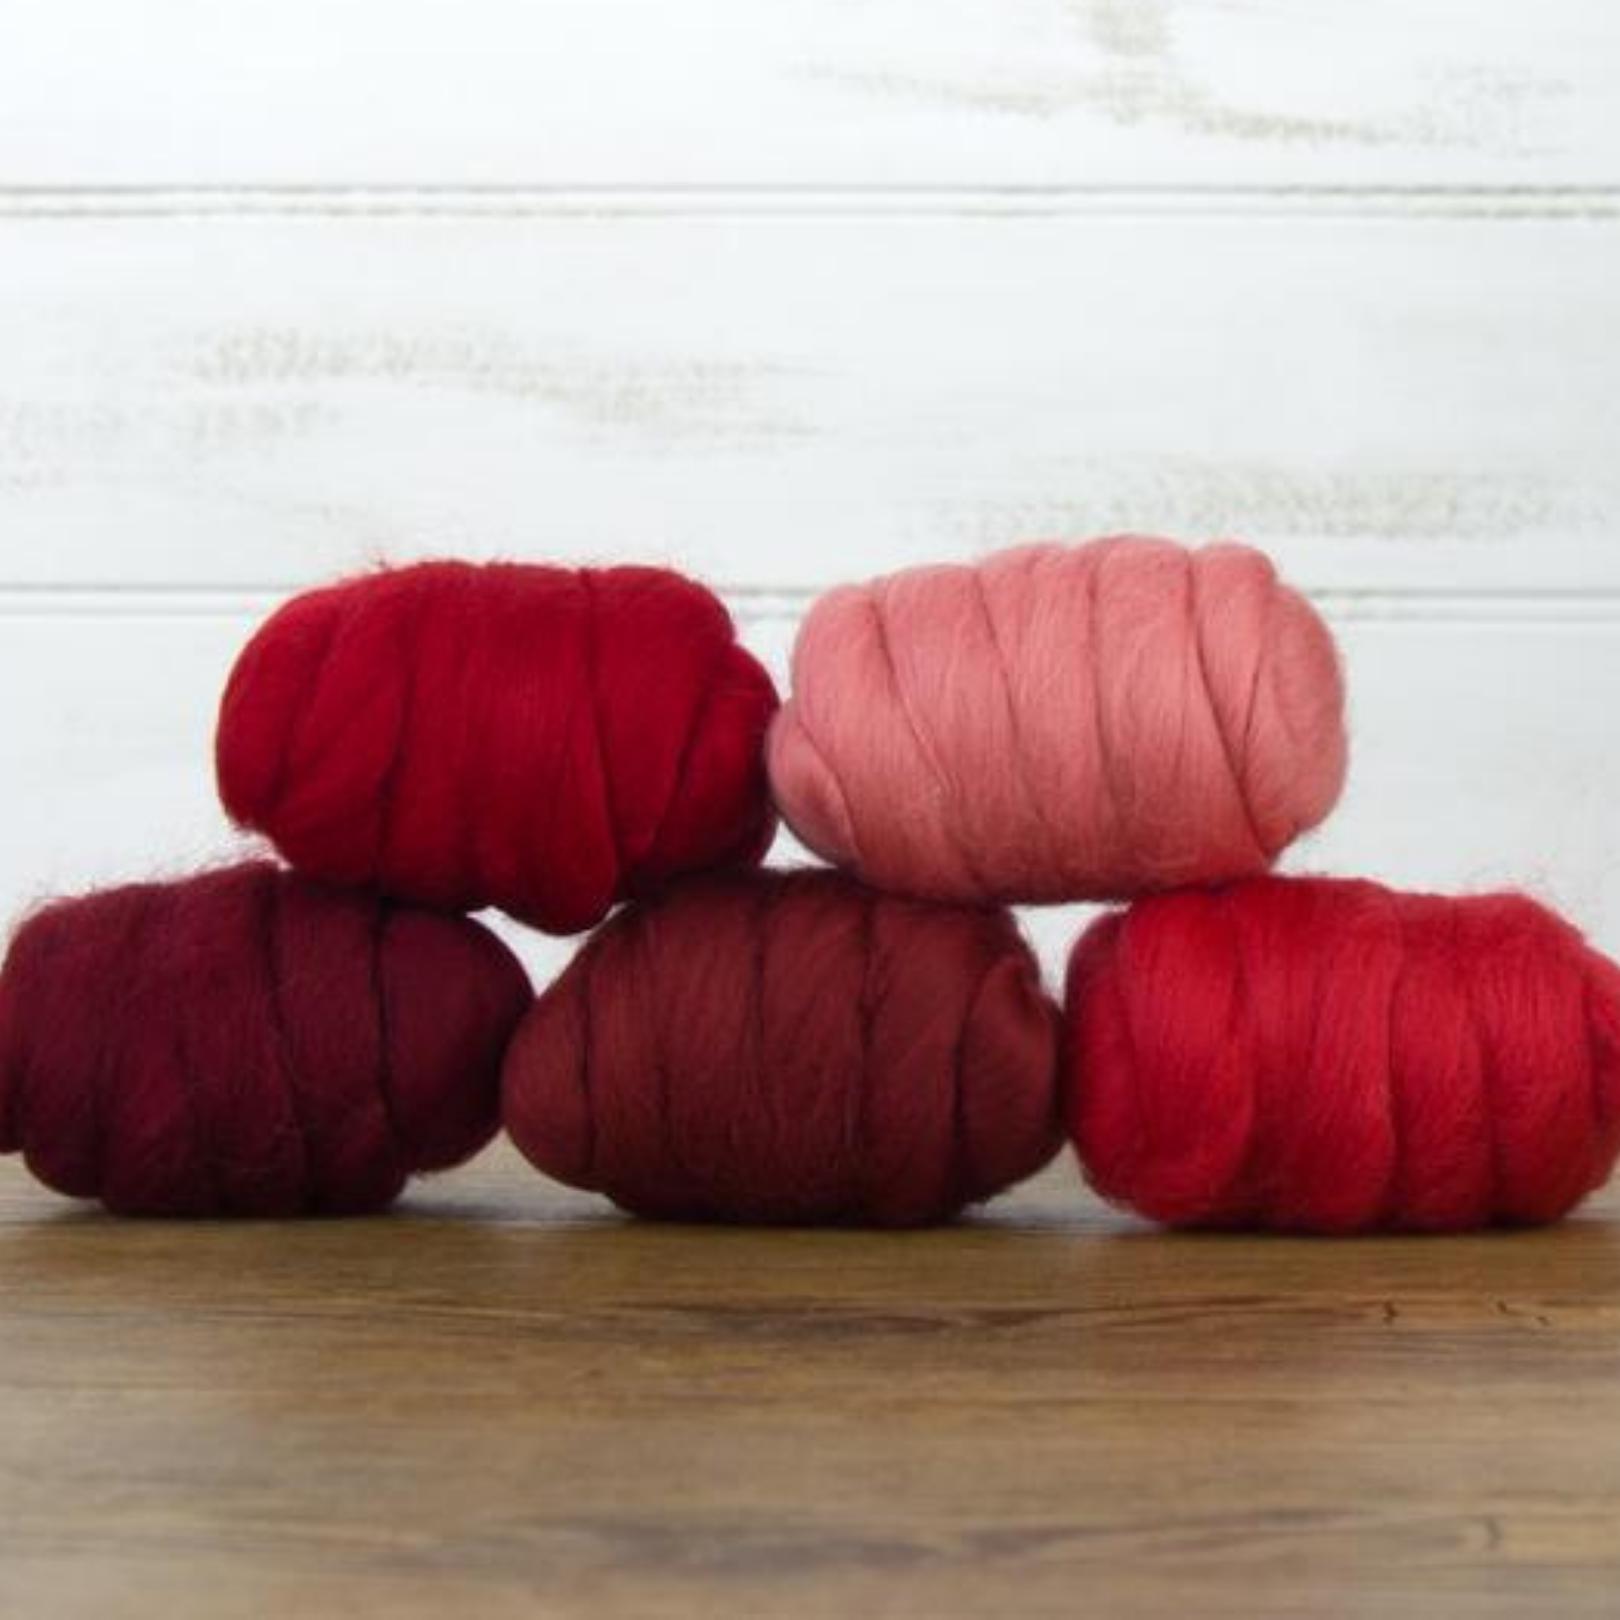 Mixed Merino Wool Variety Pack | Wondrous Reds (Reds) 250 Grams, 23 Micron - Textile Indie 